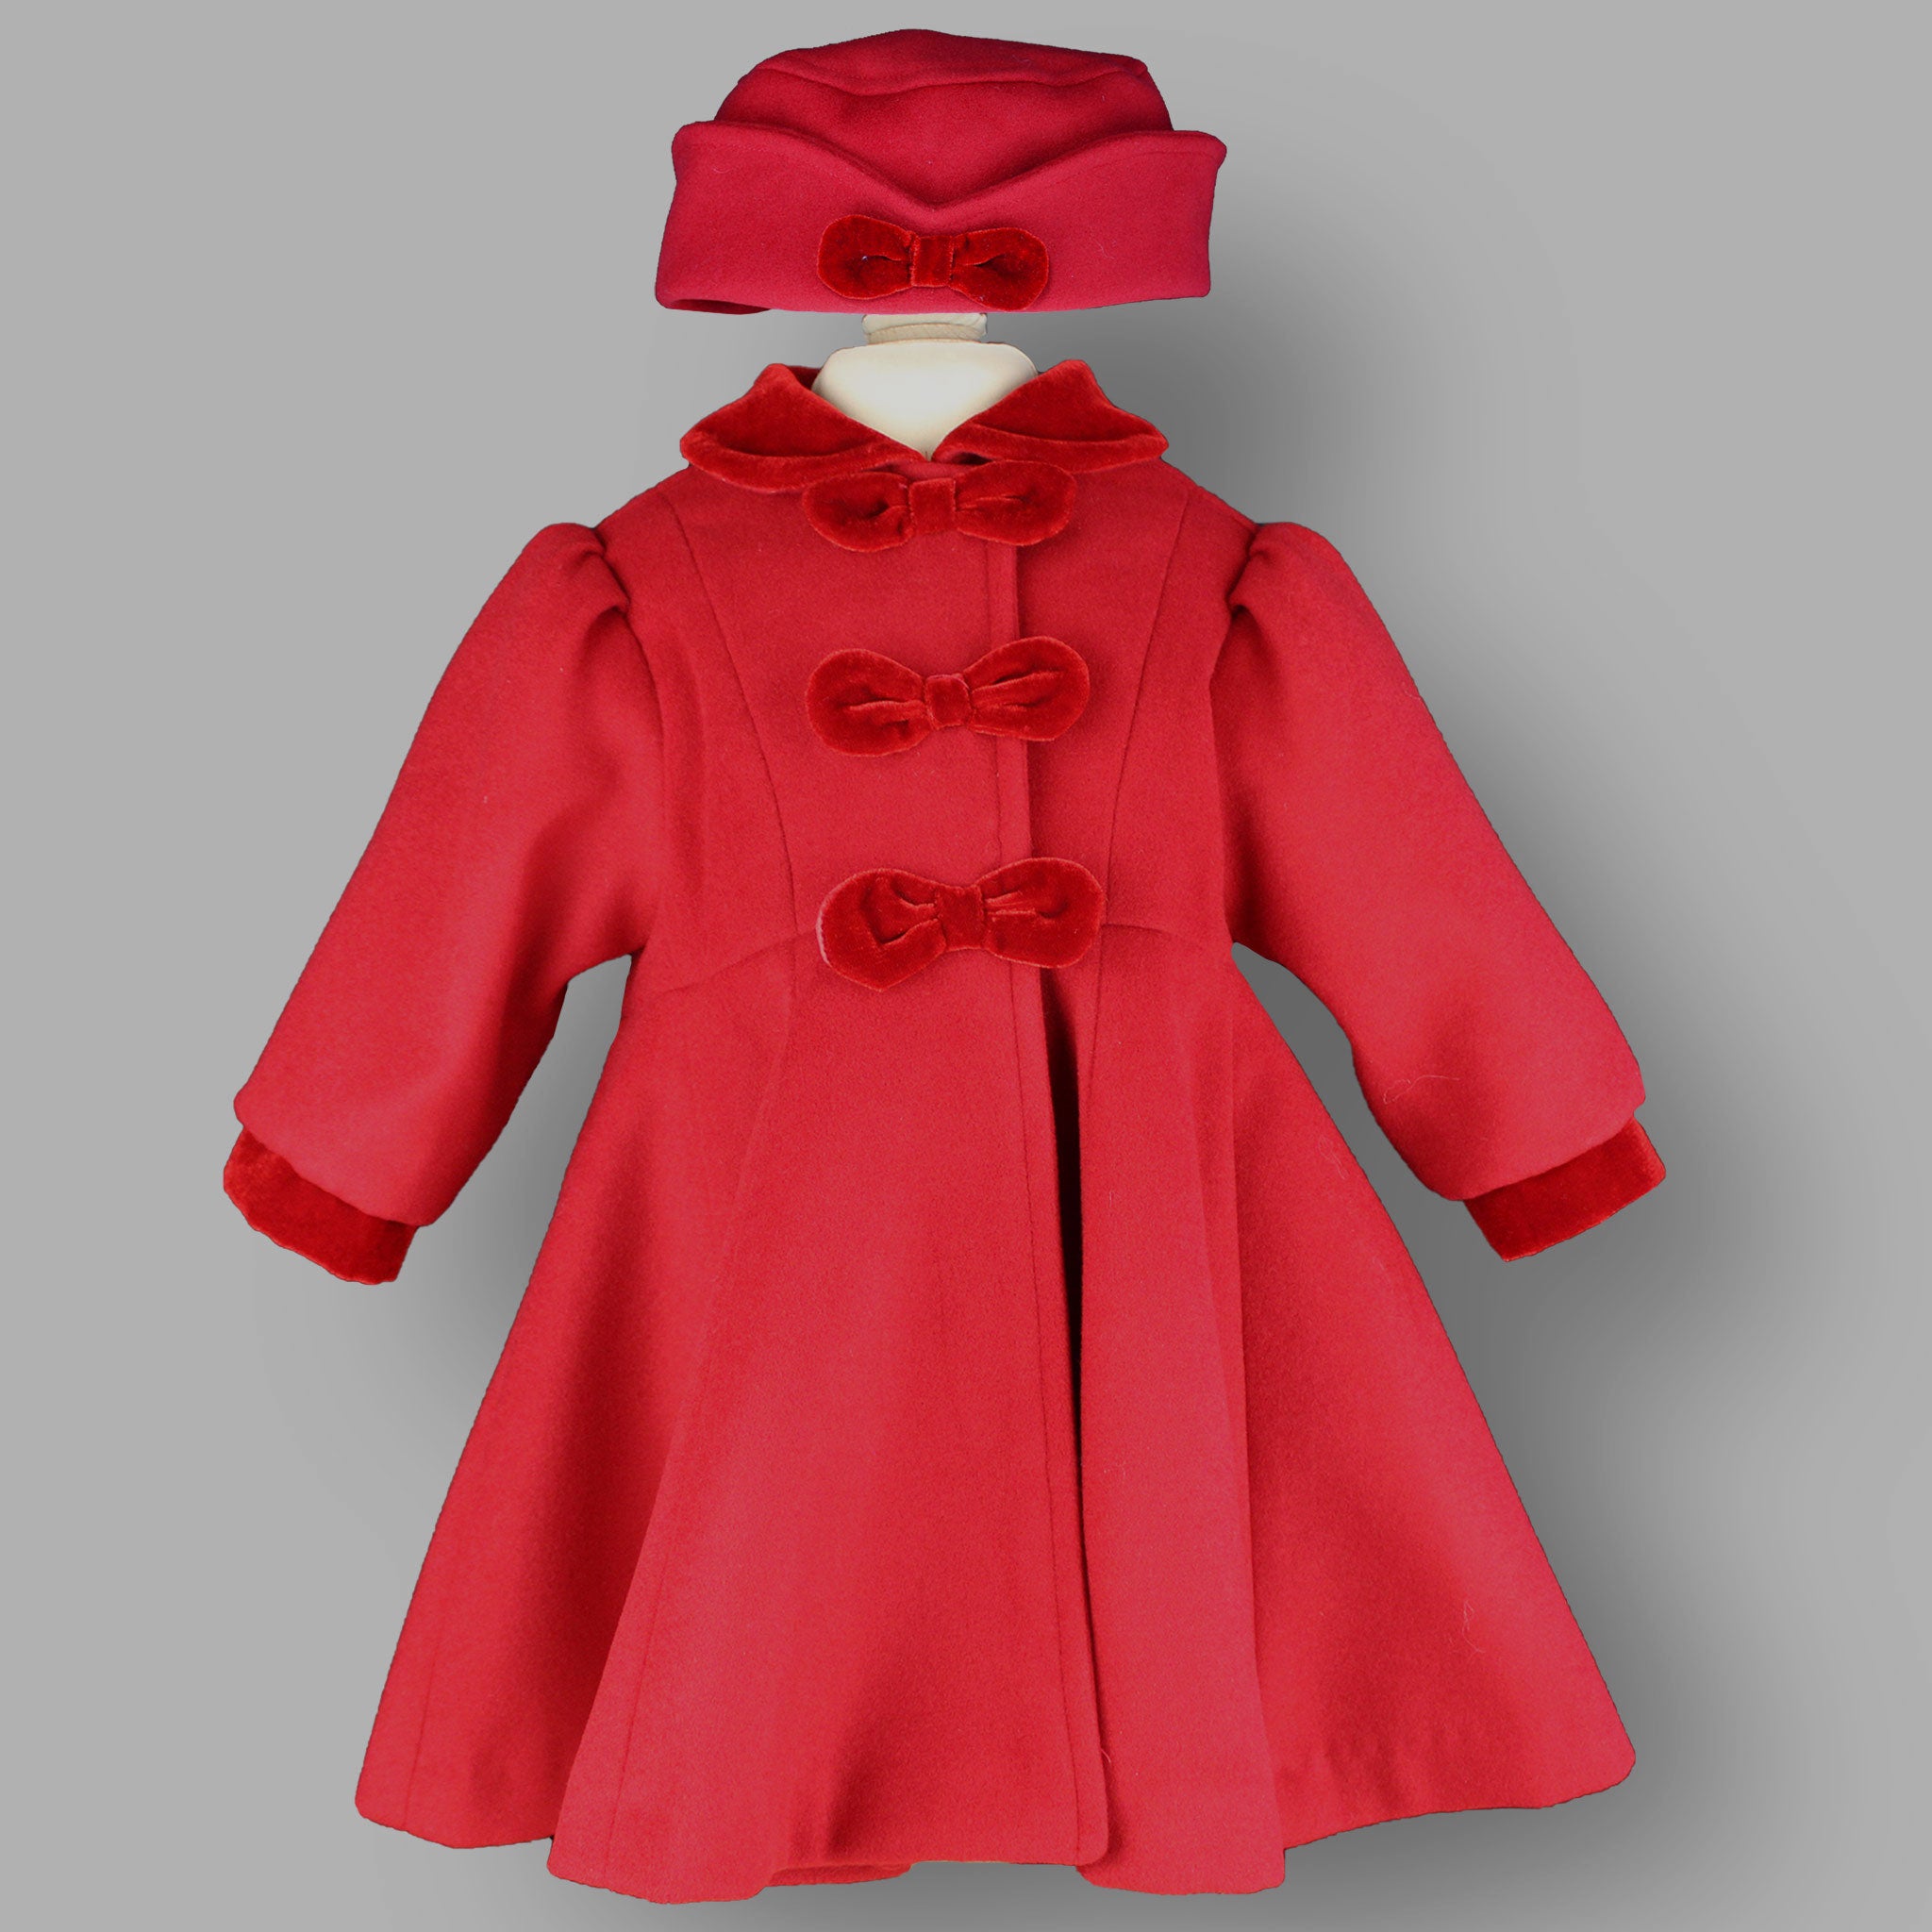 sarah louise baby girl red coat and hat